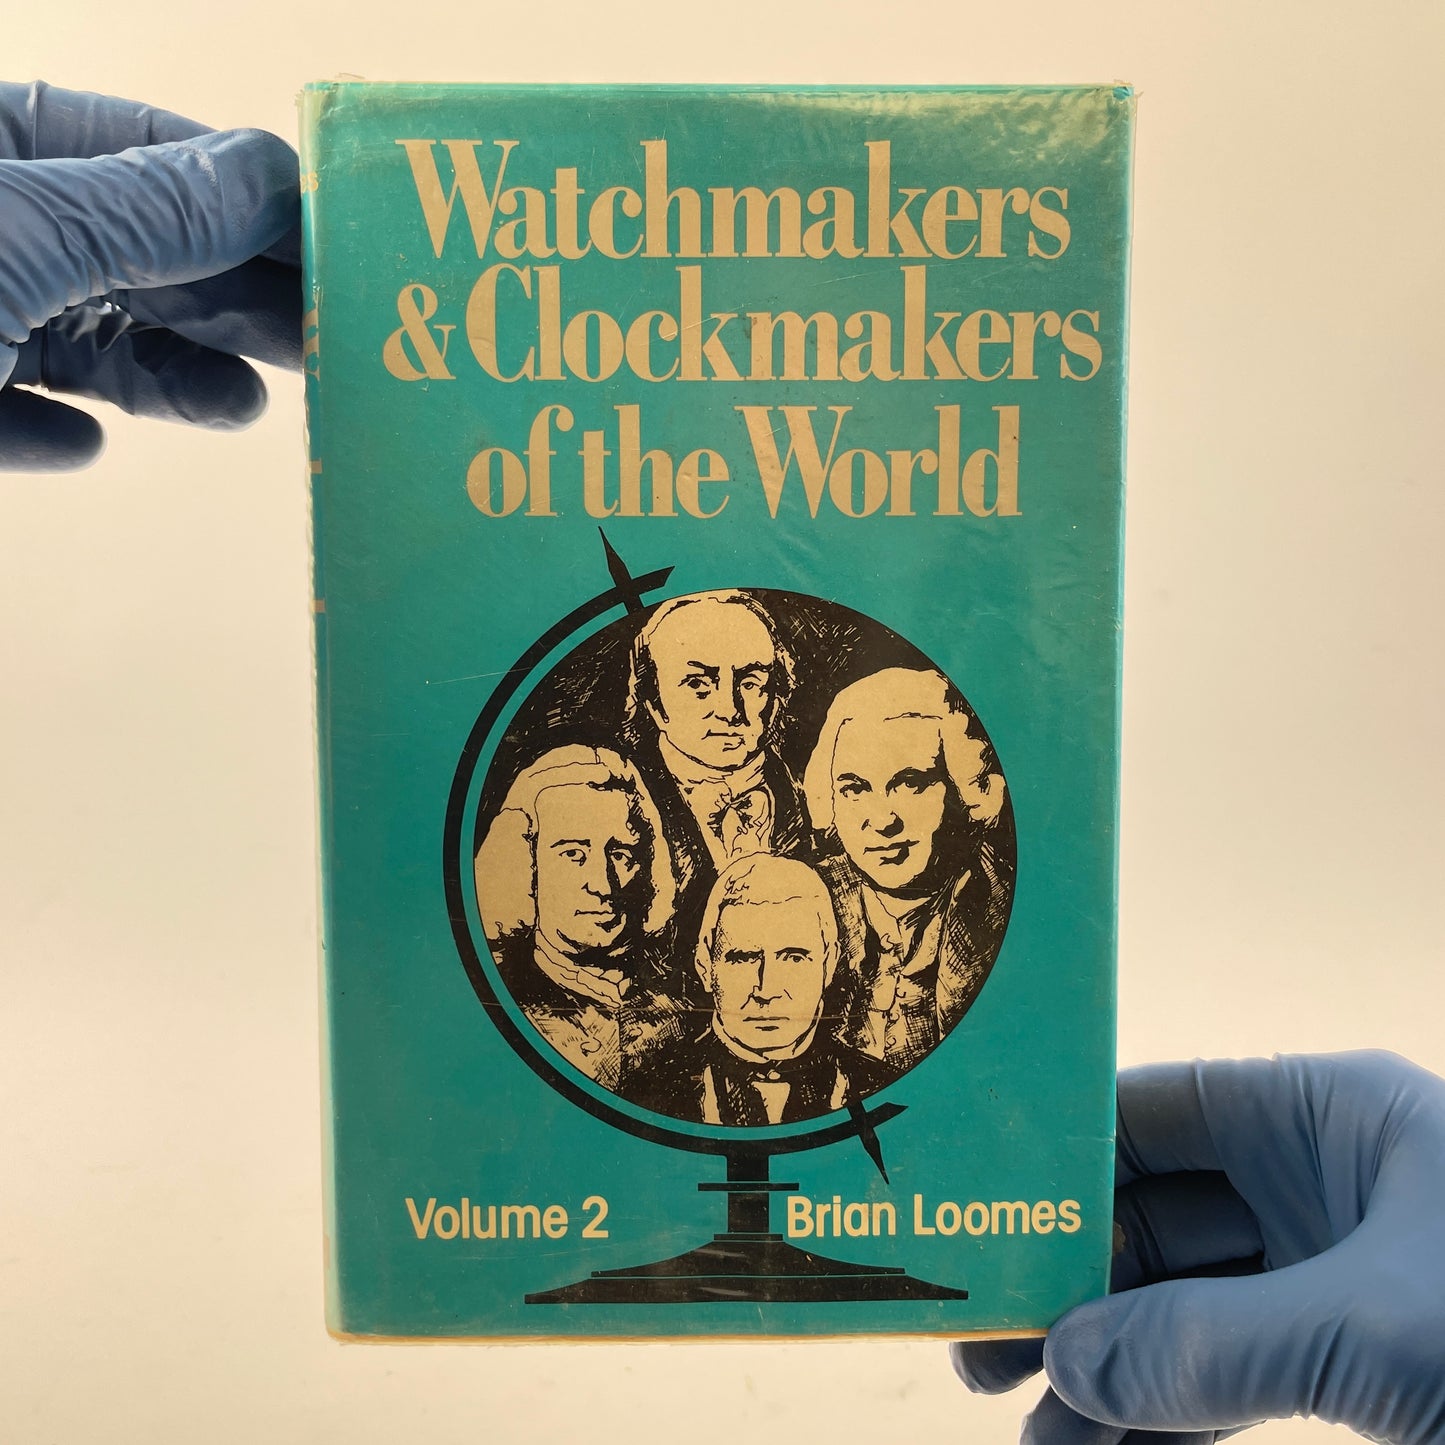 Lot 106- Watchmakers & Clockmakers of the World